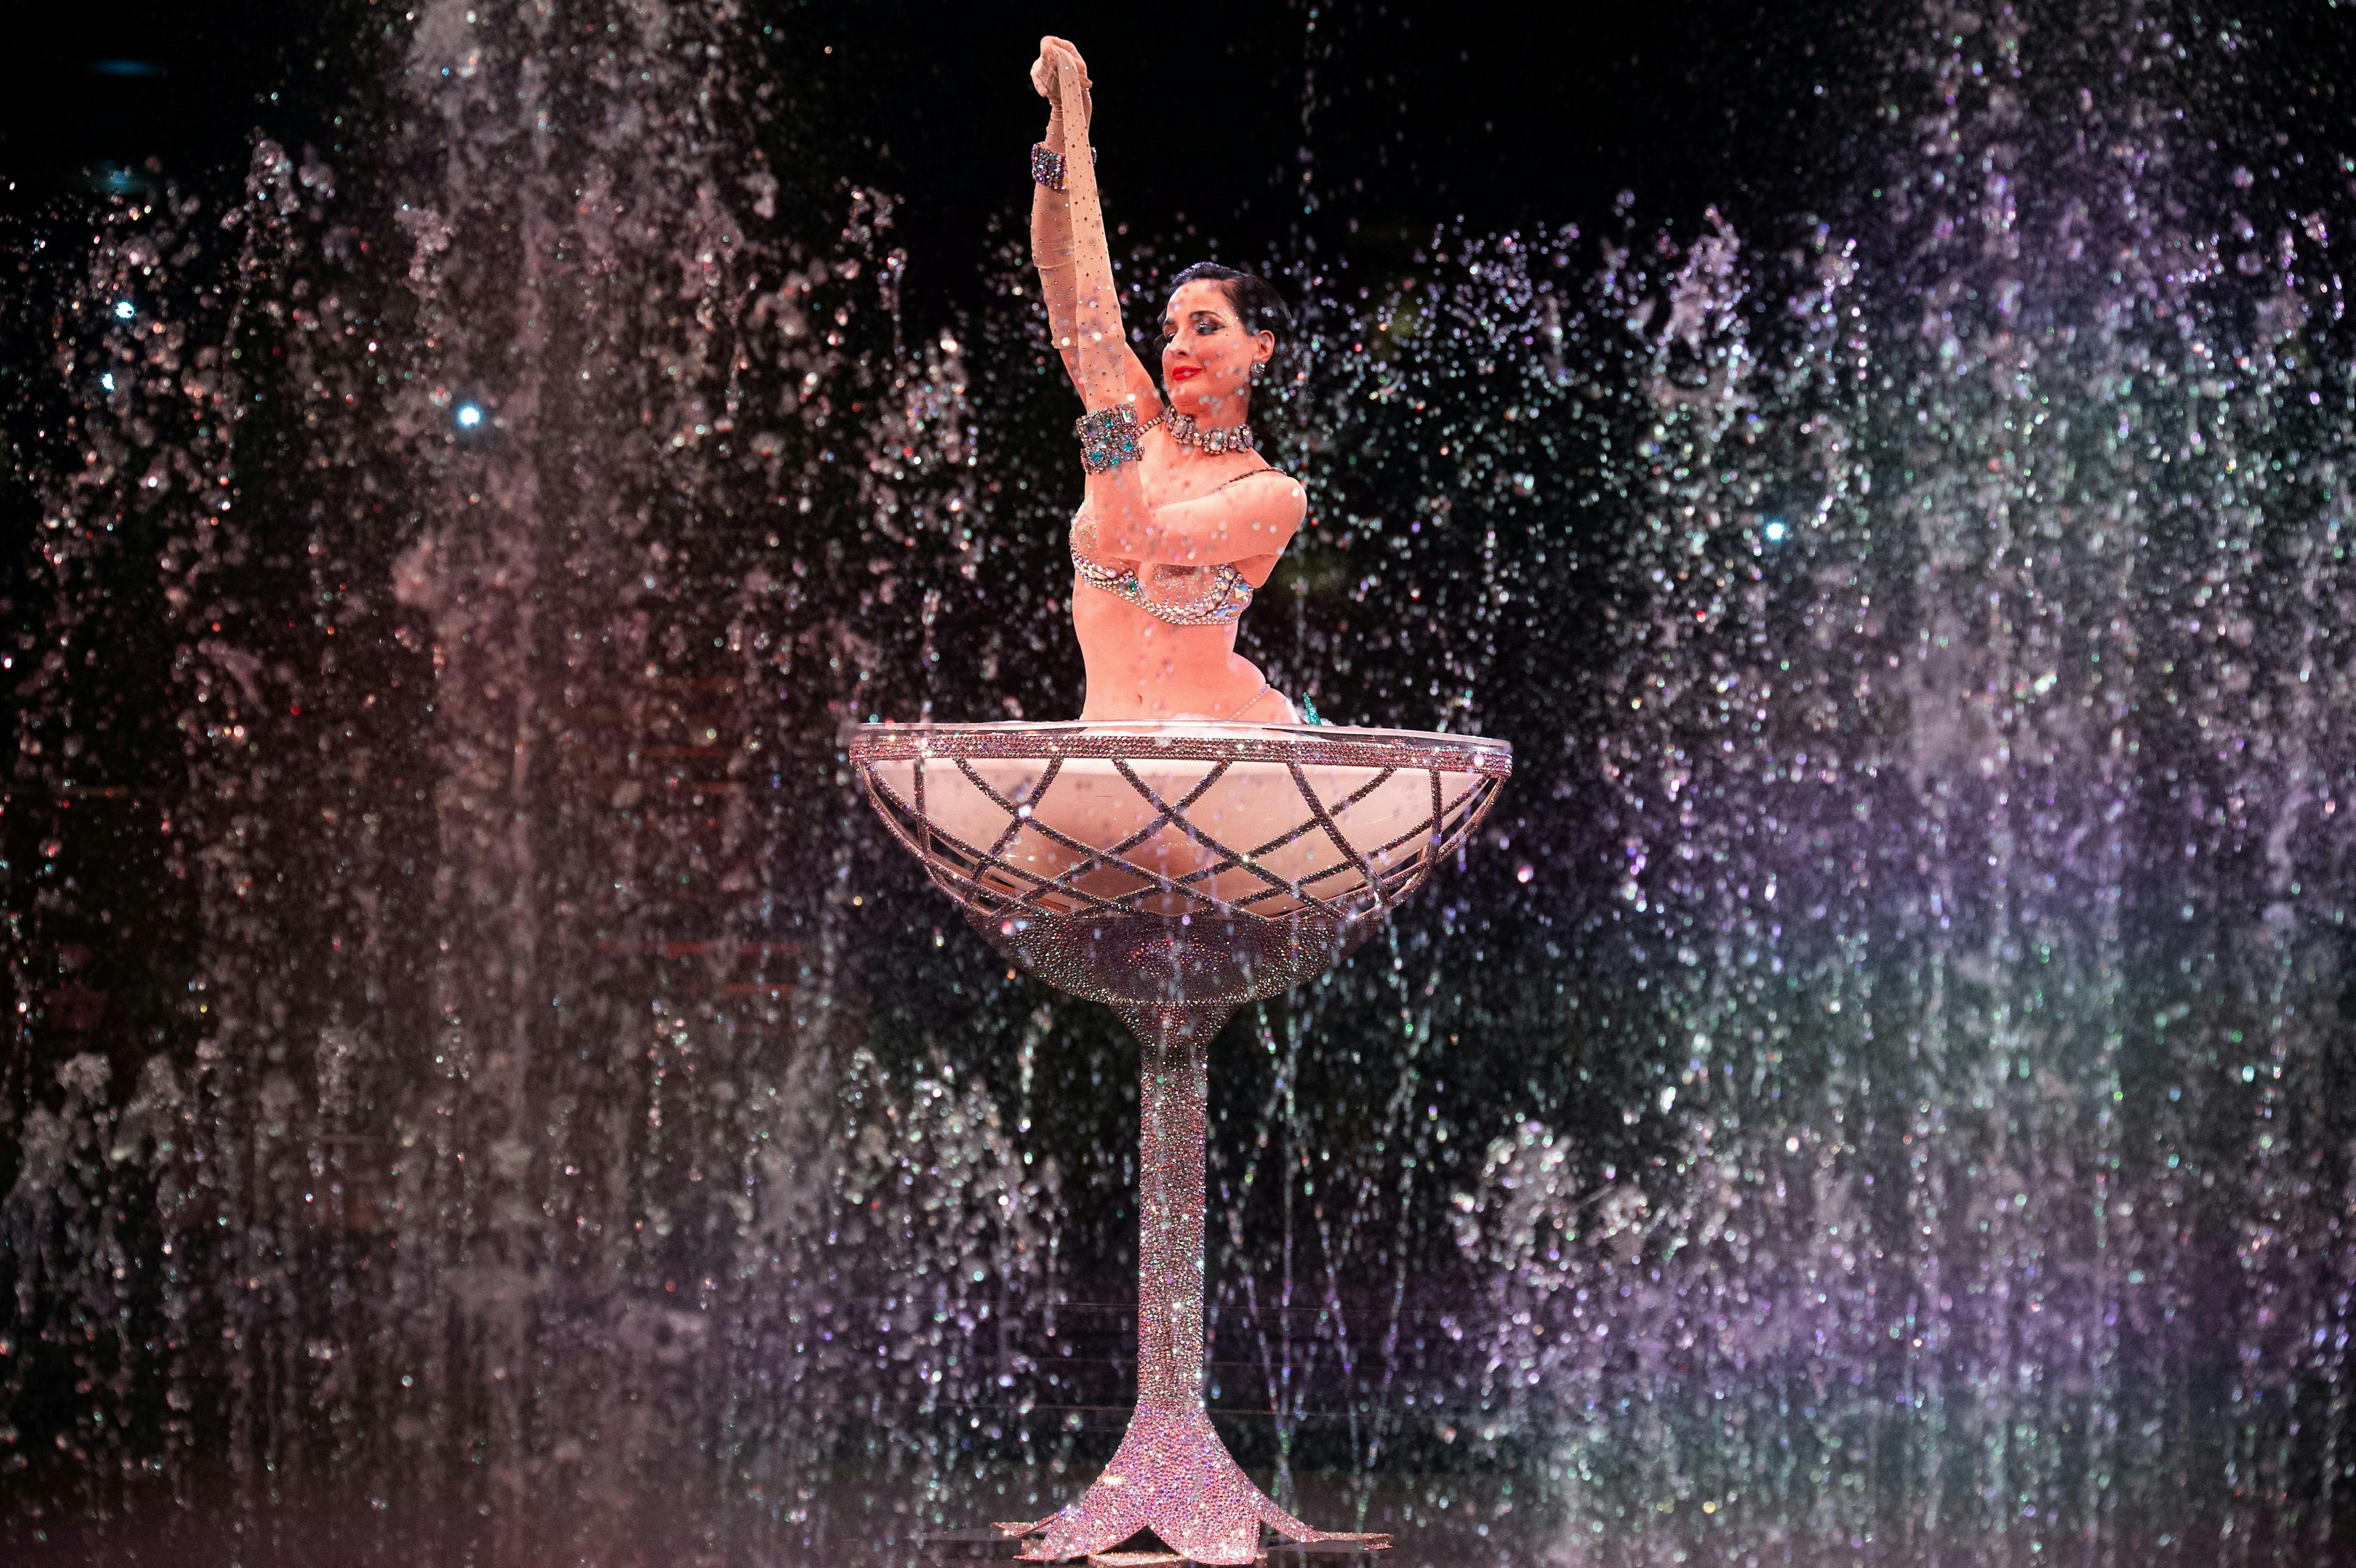 paris architecture fountain water dancing leisure activities person performer solo performance jewelry necklace